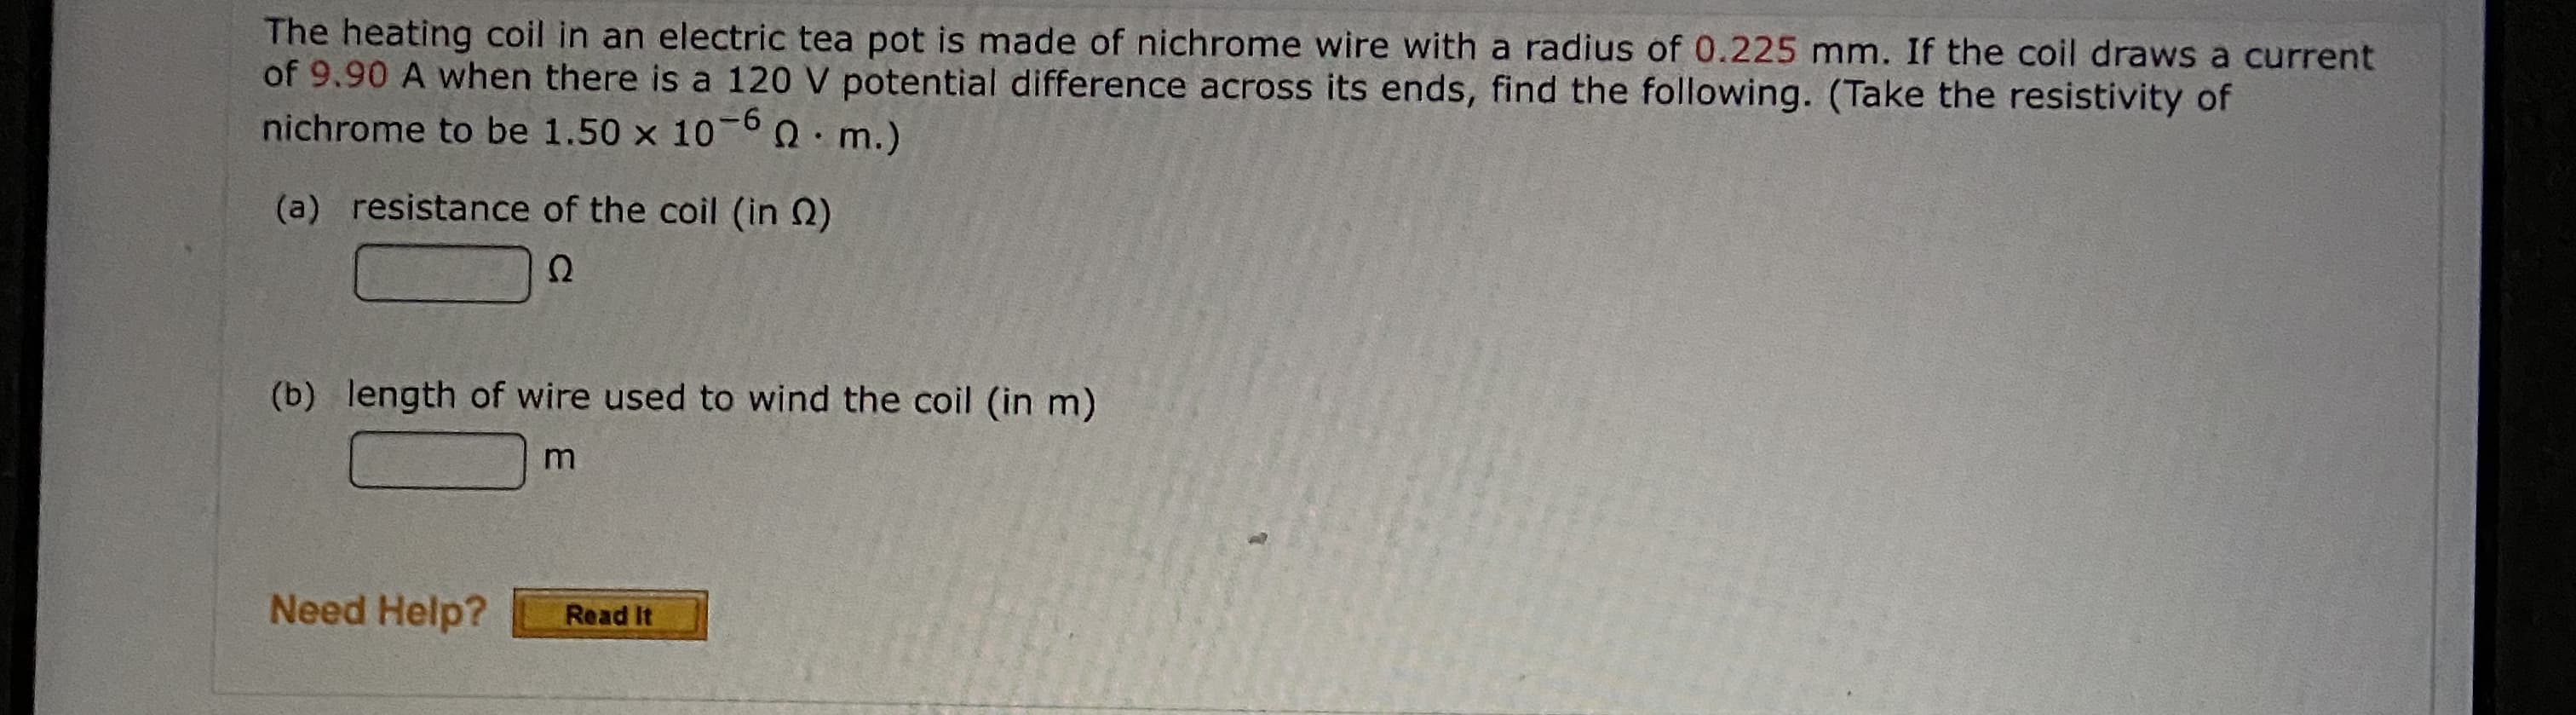 The heating coil in an electric tea pot is made of nichrome wire with a radius of 0.225 mm. If the coil draws a current
of 9.90 A when there is a 120 V potential difference across its ends, find the following. (Take the resistivity of
nichrome to be 1.50 x 10-60. m.)
(a) resistance of the coil (in Q)
(b) length of wire used to wind the coil (in m)
